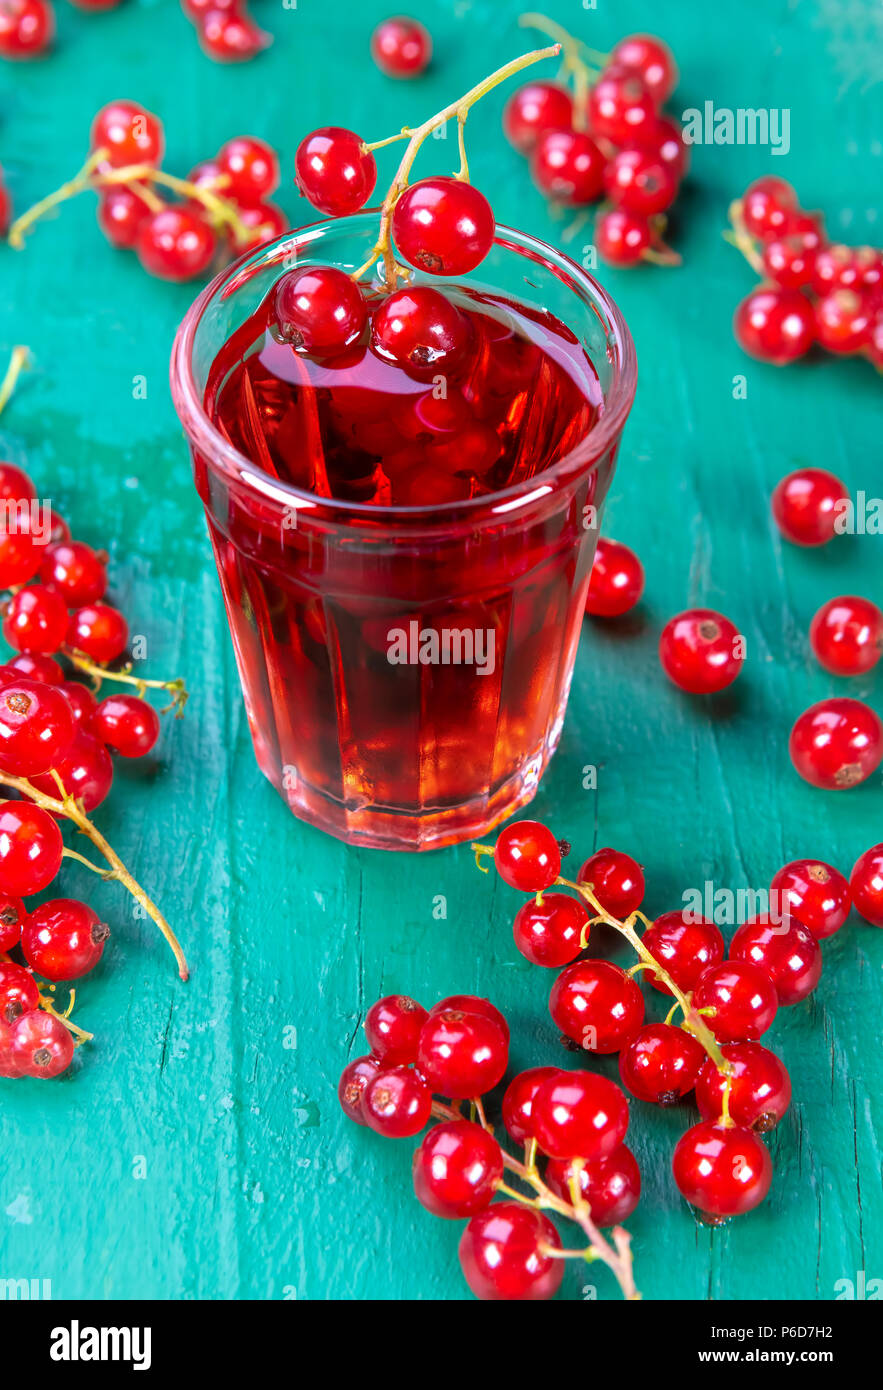 Redcurrant and glass with fruits and drink juice on wood table. Focus on redcurrant in glass, Stock Photo